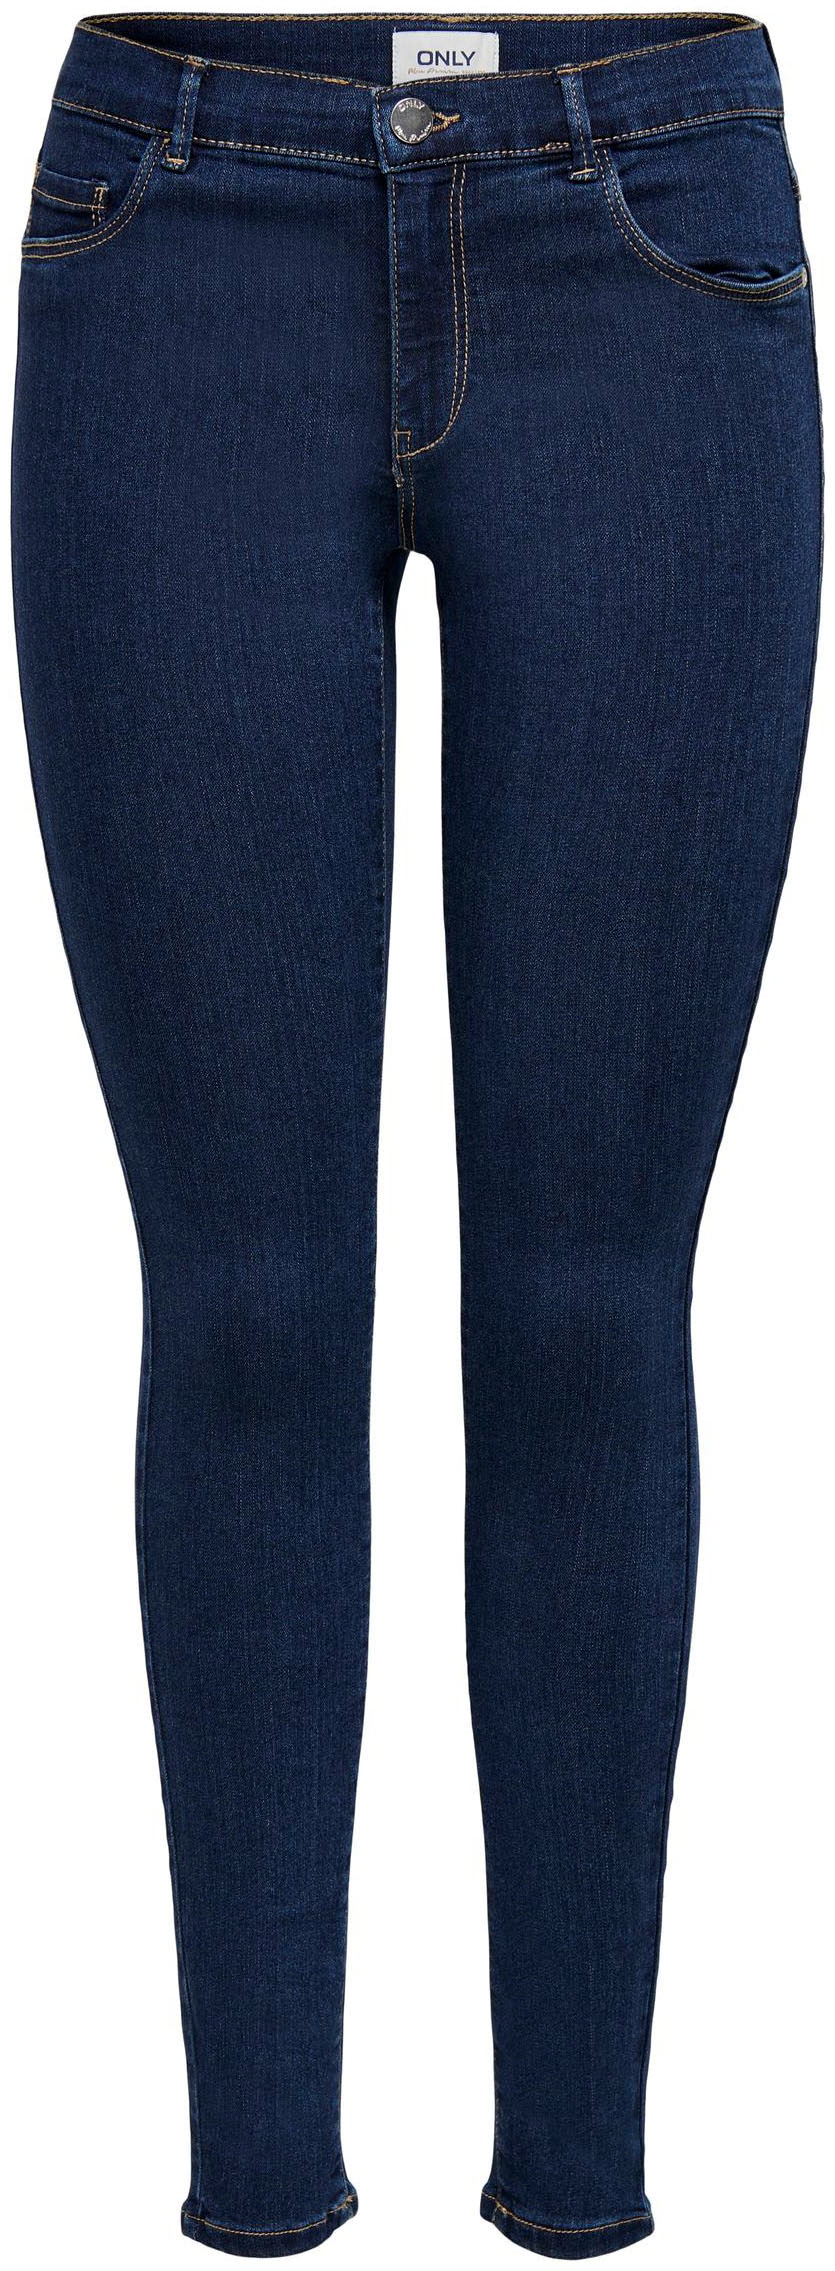 OTTO Skinny-fit-Jeans Online REG Shop SKINNY »ONLRAIN im LIFE ONLY DNM«